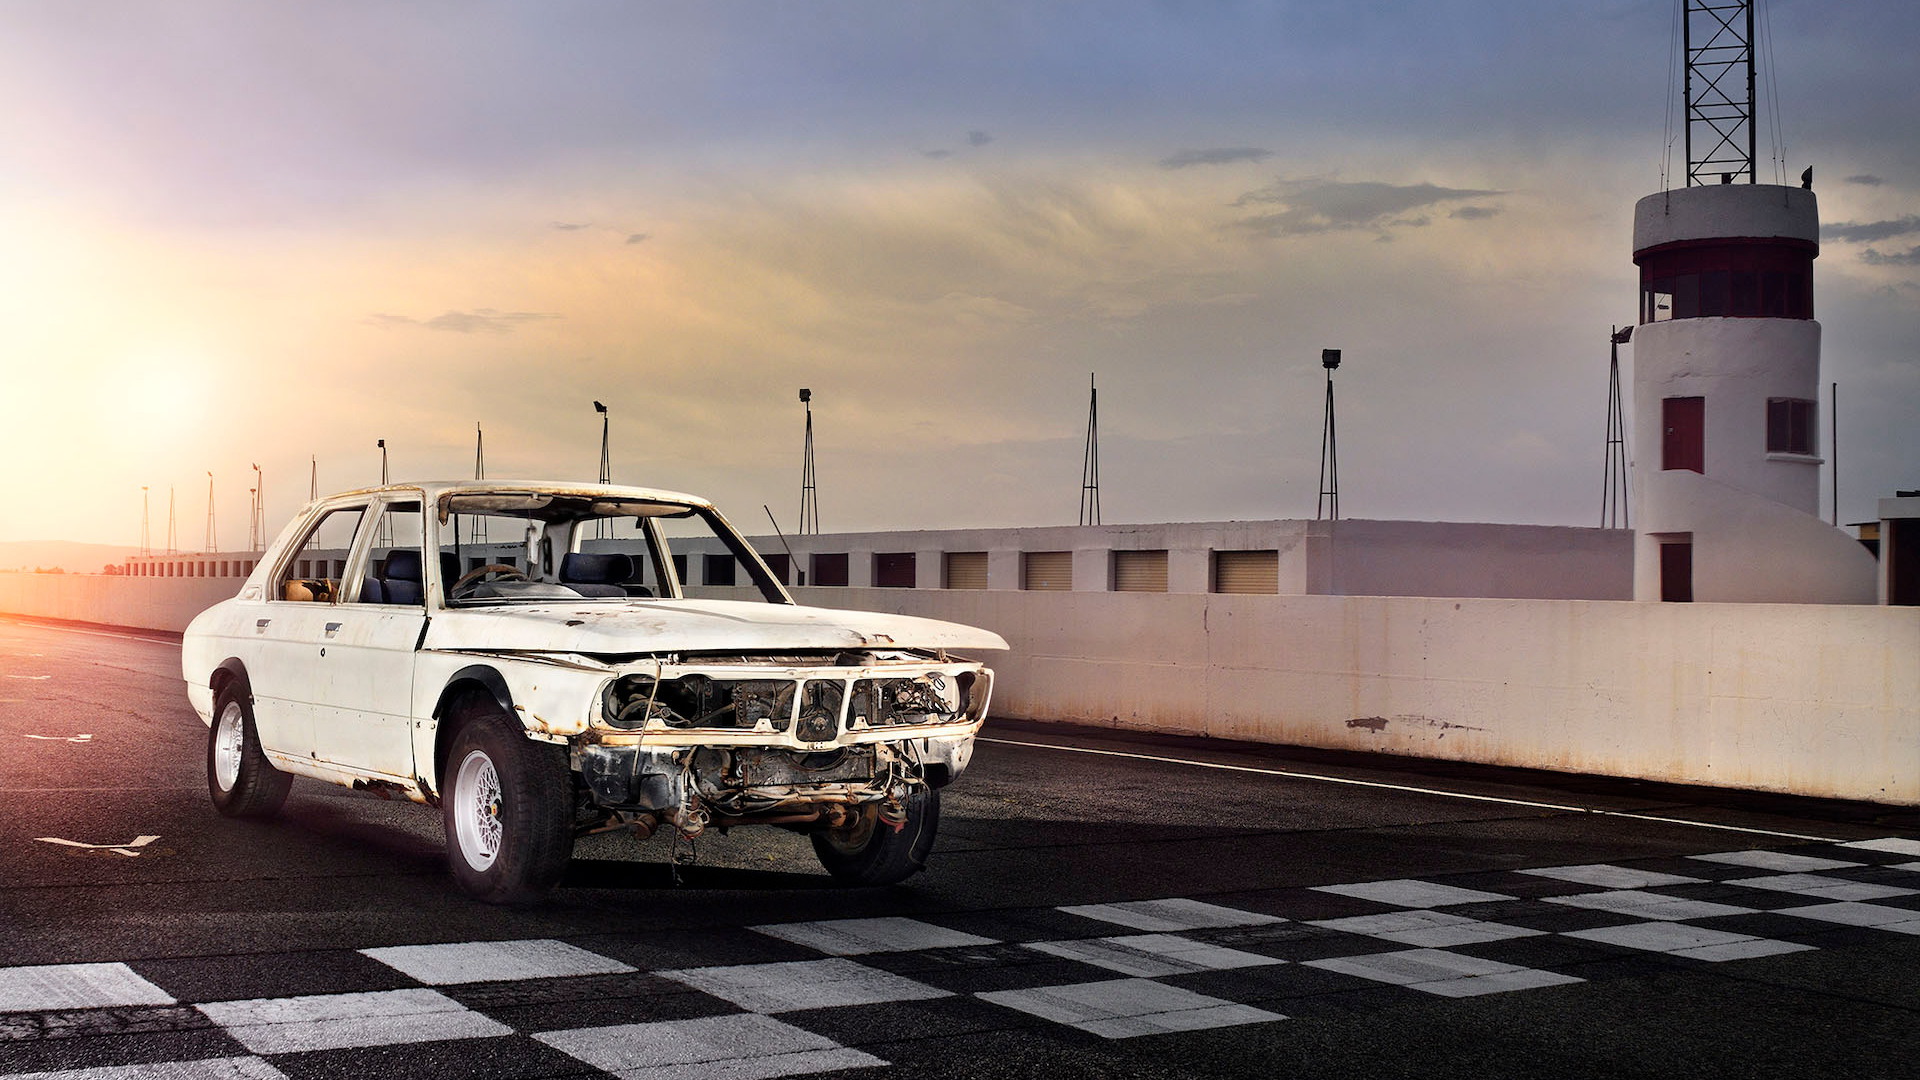 The restored BMW 530 MLE returns home